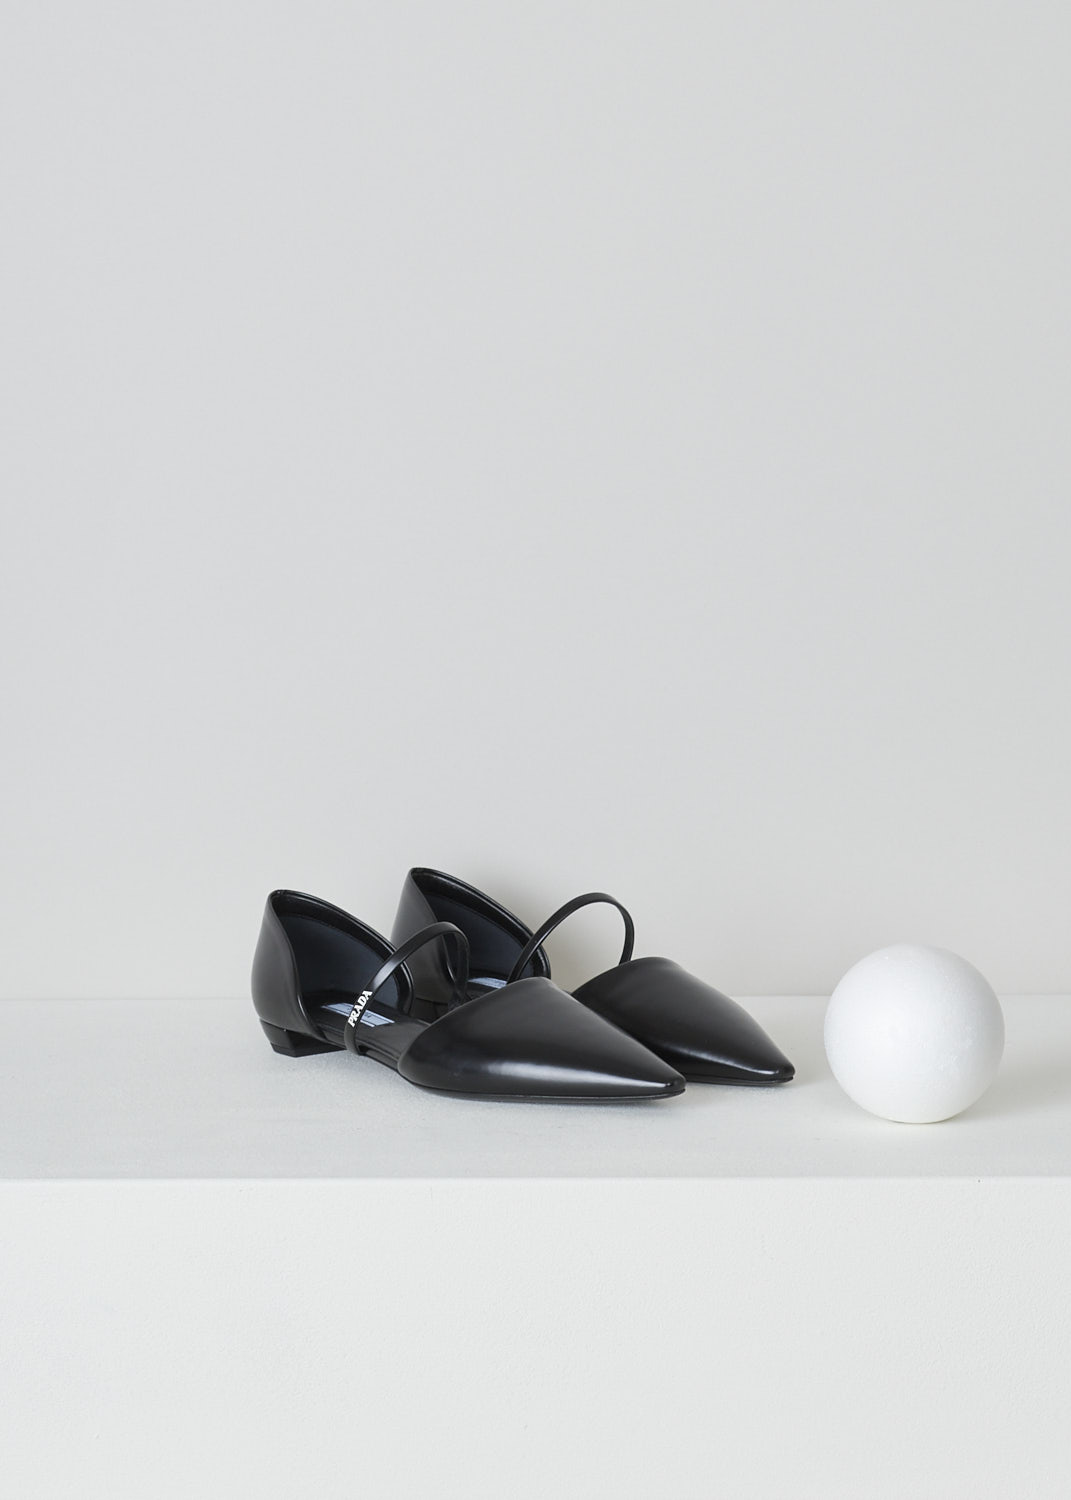 PRADA, POINTED BLACK BALLERINA FLATS, 1F519M_055_F0002_NERO, Black, Front, These black leather slip-on ballerina flats have a pointed toe and a decorative strap across the vamp with the band's logo in white. These ballerina flats have a small heel. 

